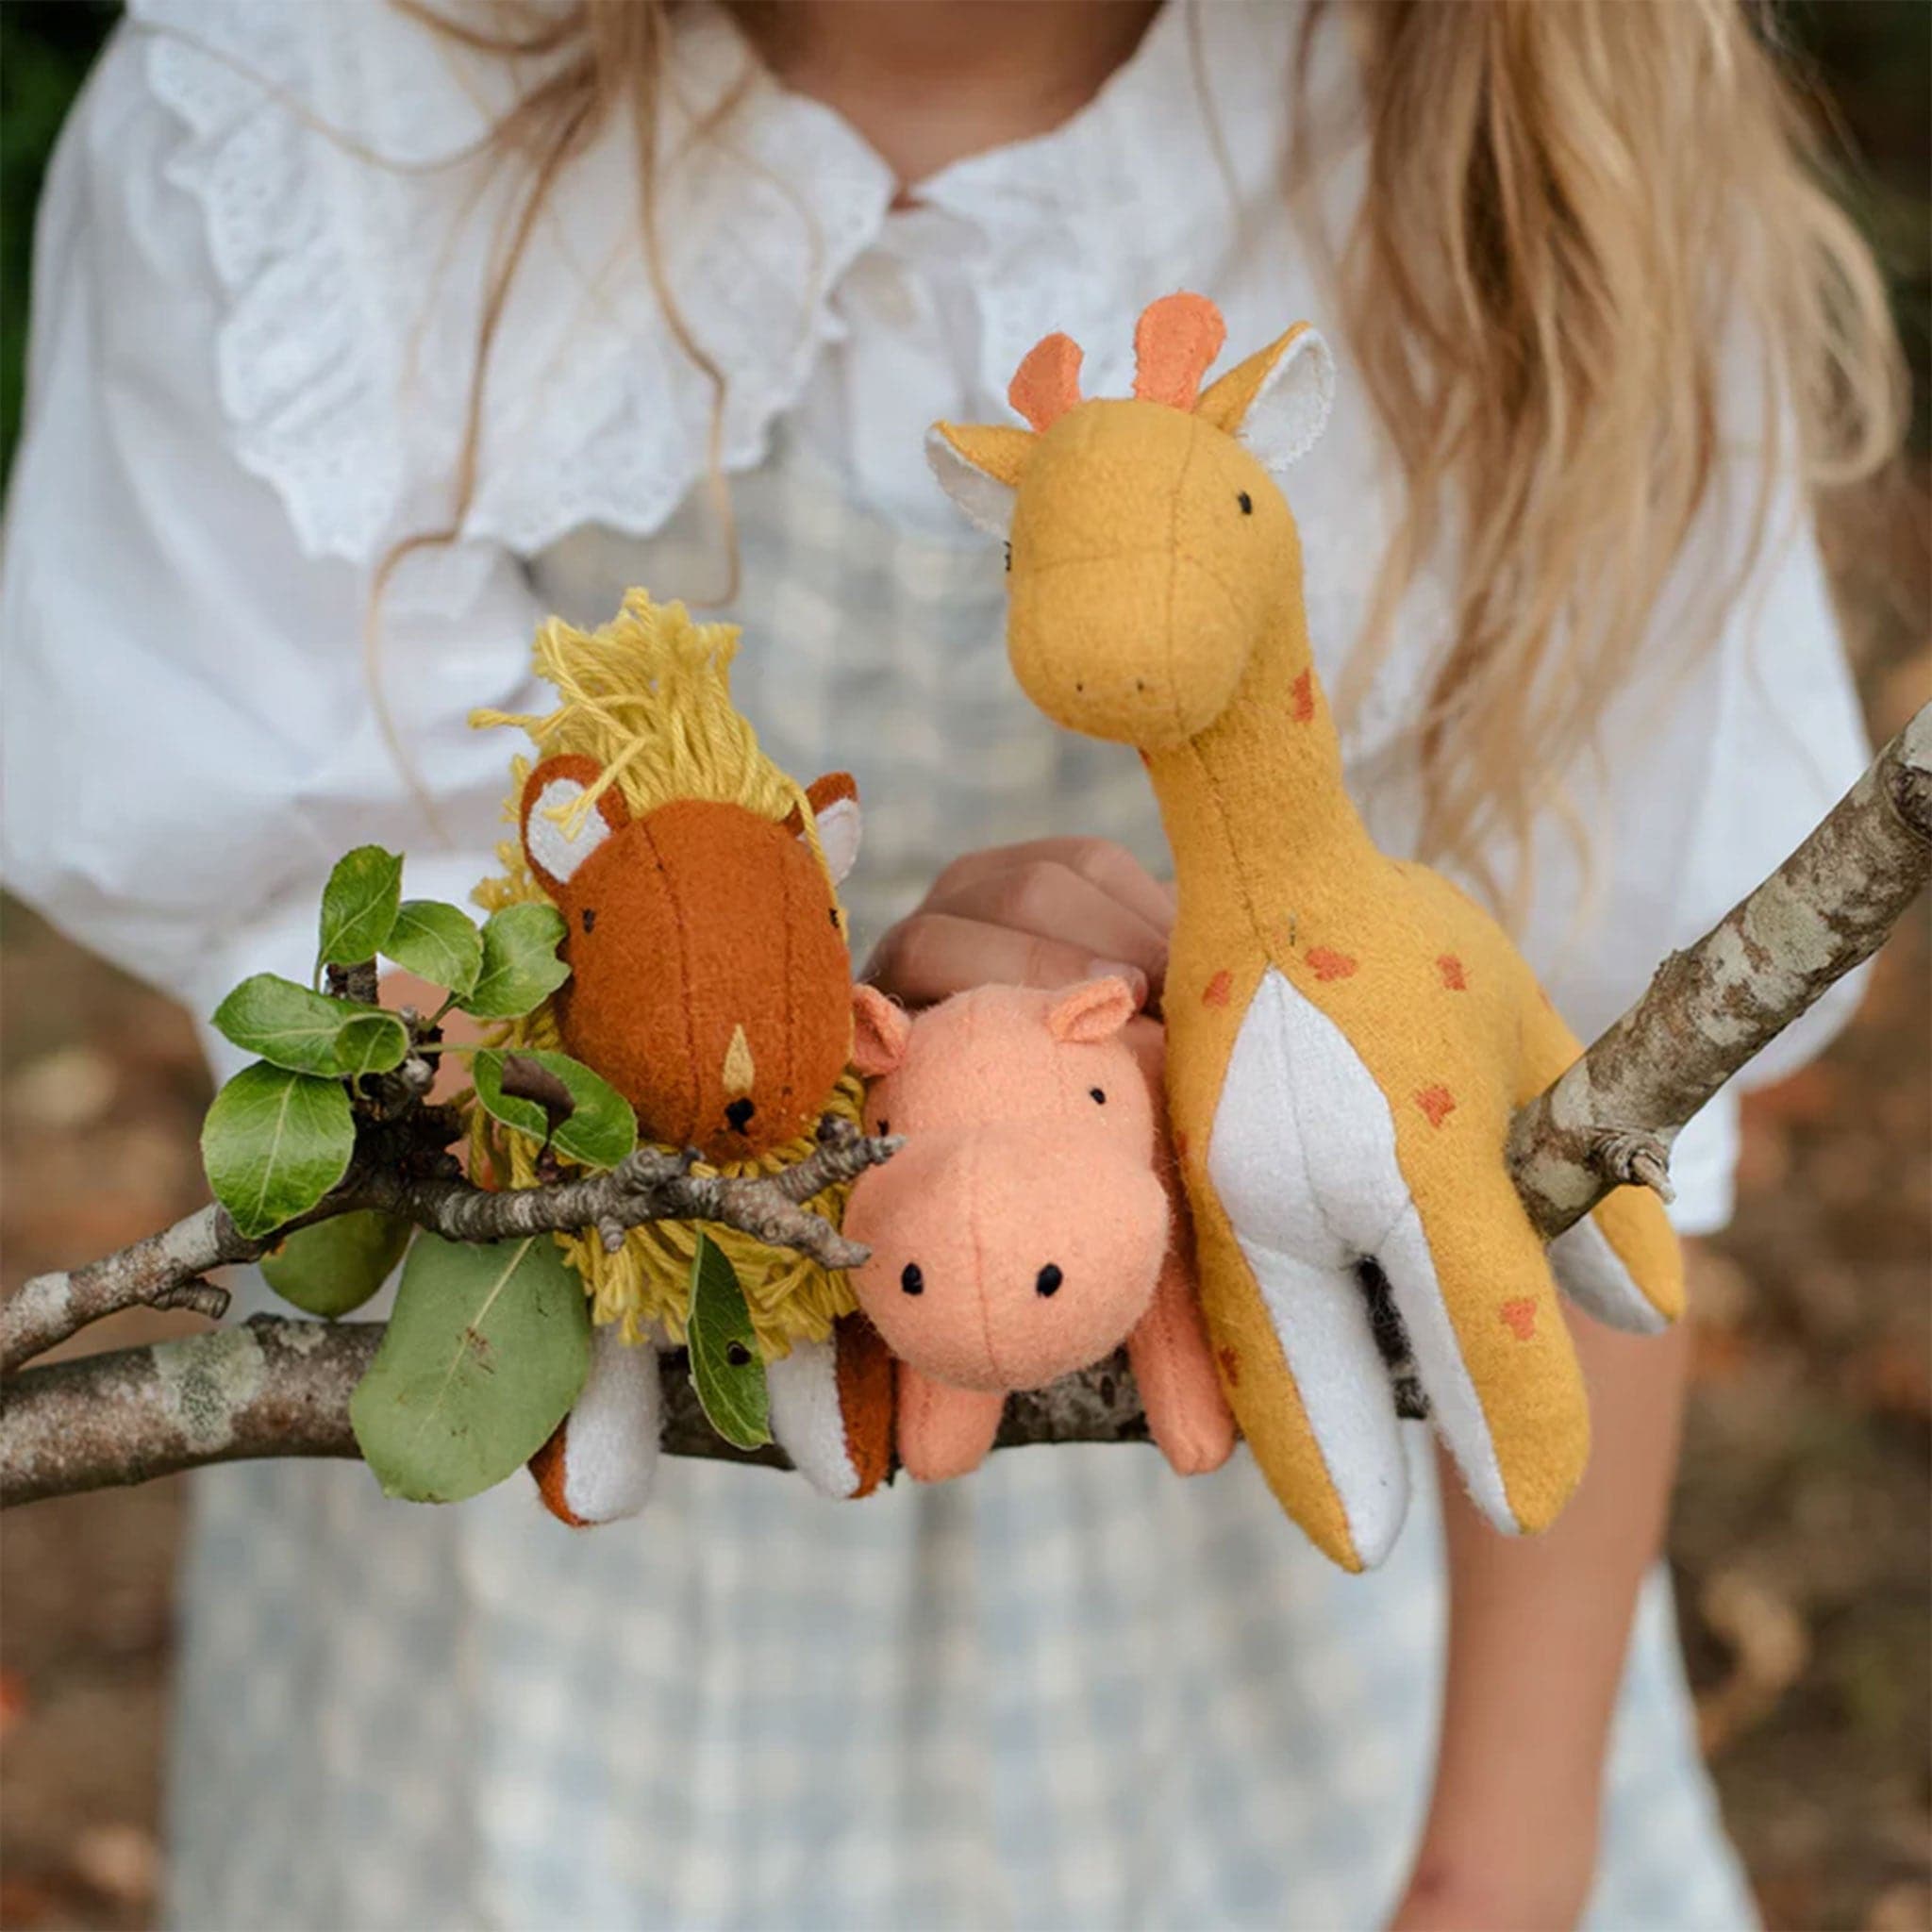 A stuffed animal set inspired by the Savannah. It includes a pink hippo, a red lion with a yellow mane, and a mustard yellow giraffe with orange spots and an orange tail.